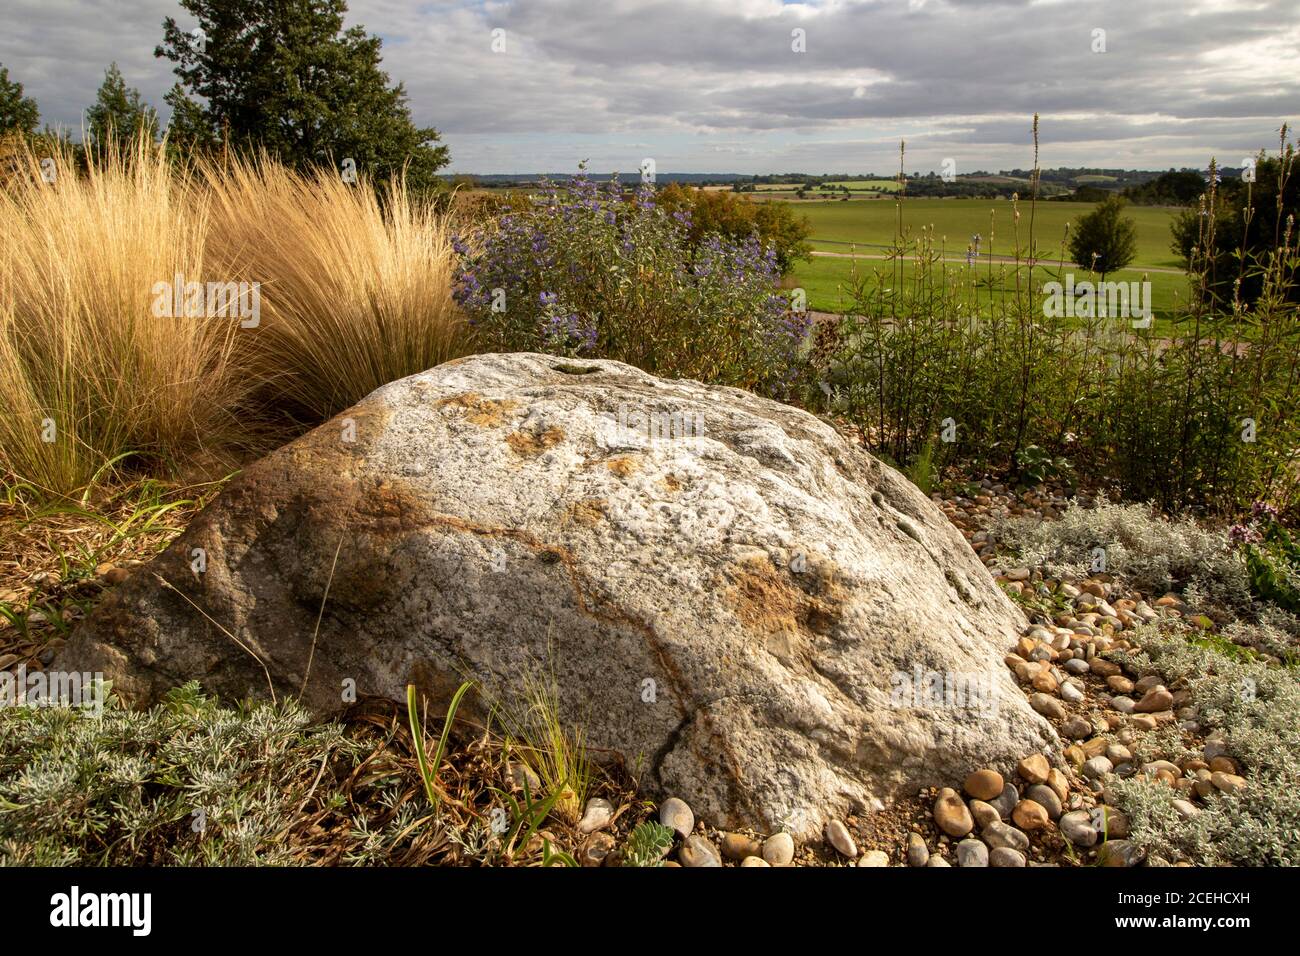 Verdant Essex landscape with large rock and Stipa Tenuissima, Stock Photo